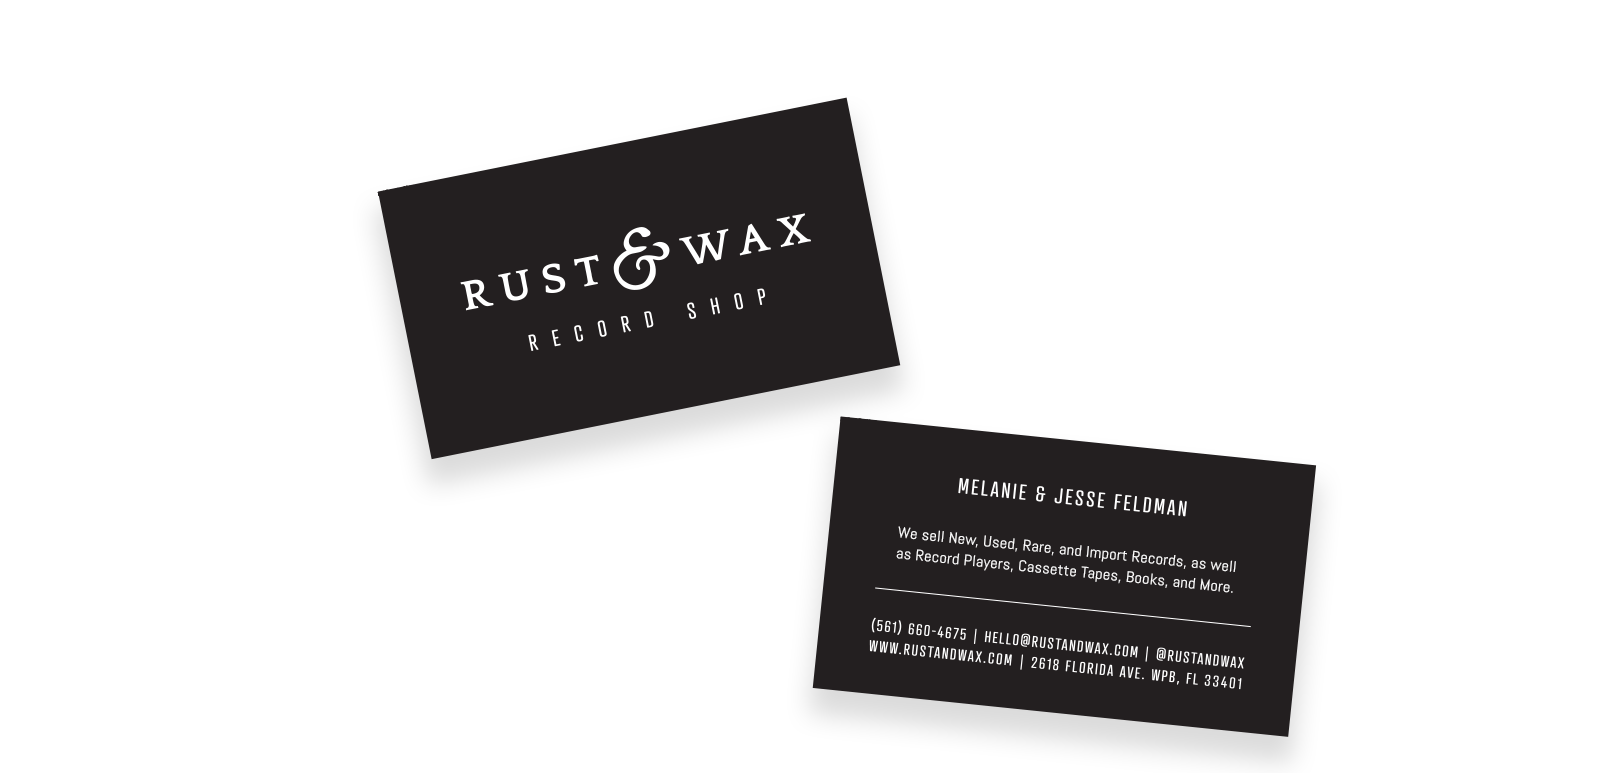 Business card mock-ups featuring Rust & Wax logo in white against a dark charcoal background with a condensed type that reads 